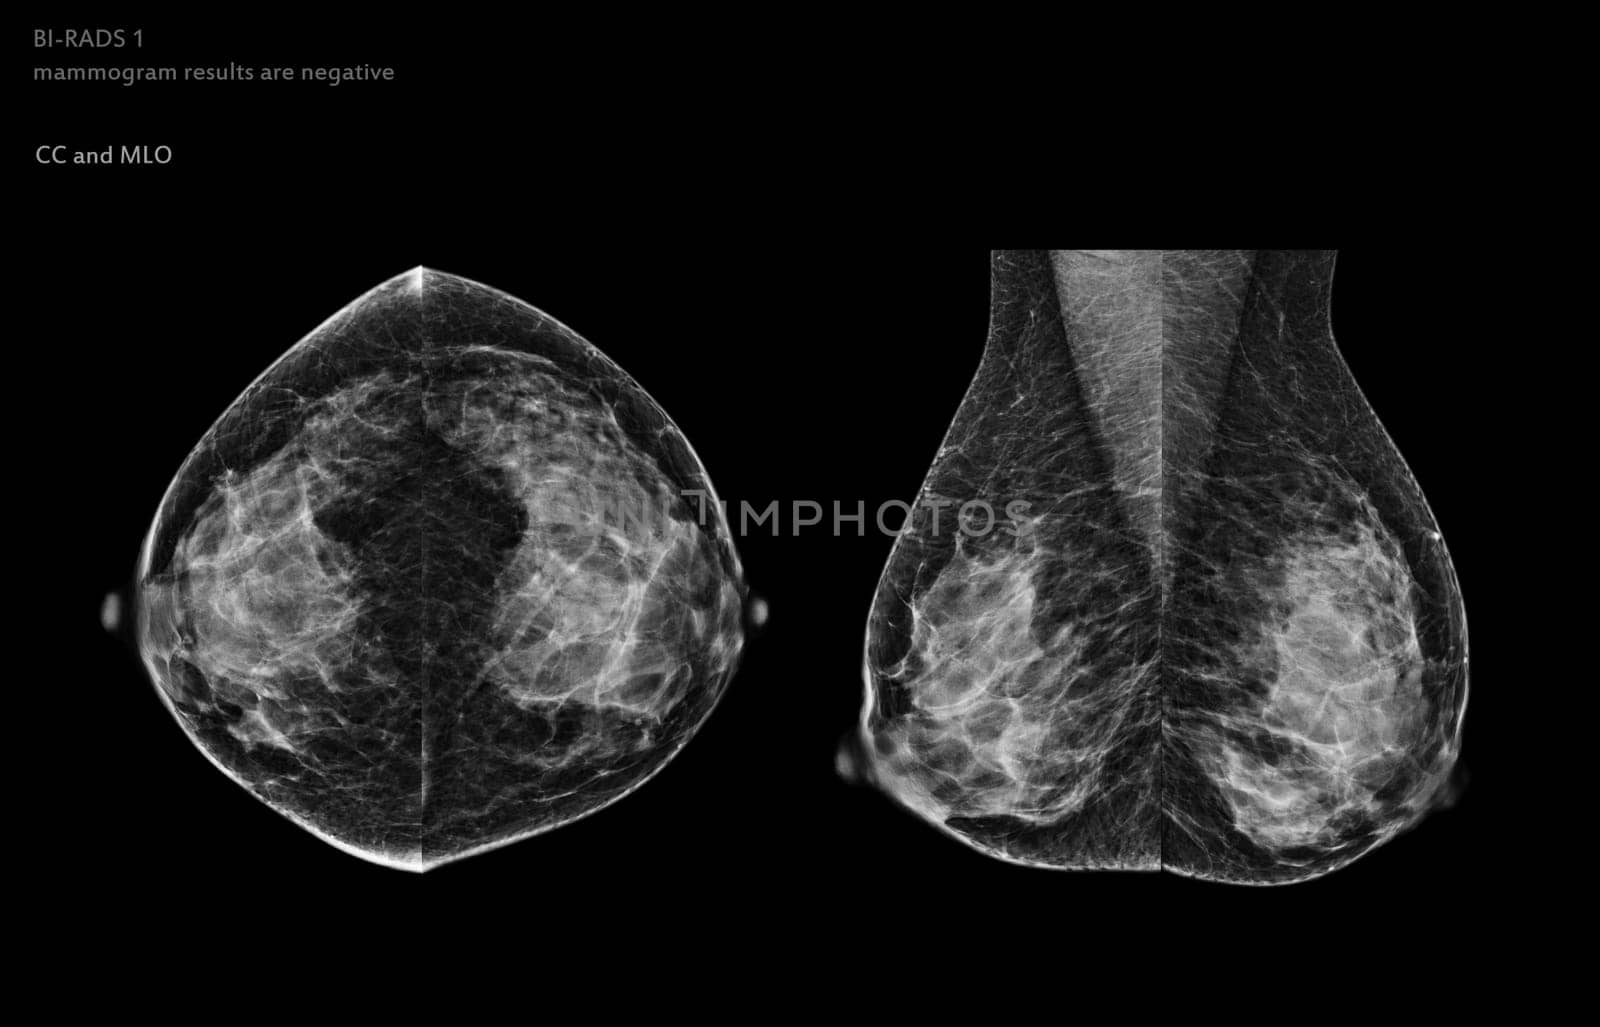  X-ray Digital Mammogram of Both side CC view and MLO view. mammography or breast scan for Breast cancer BI-RADS 1 mammogram results are negative.